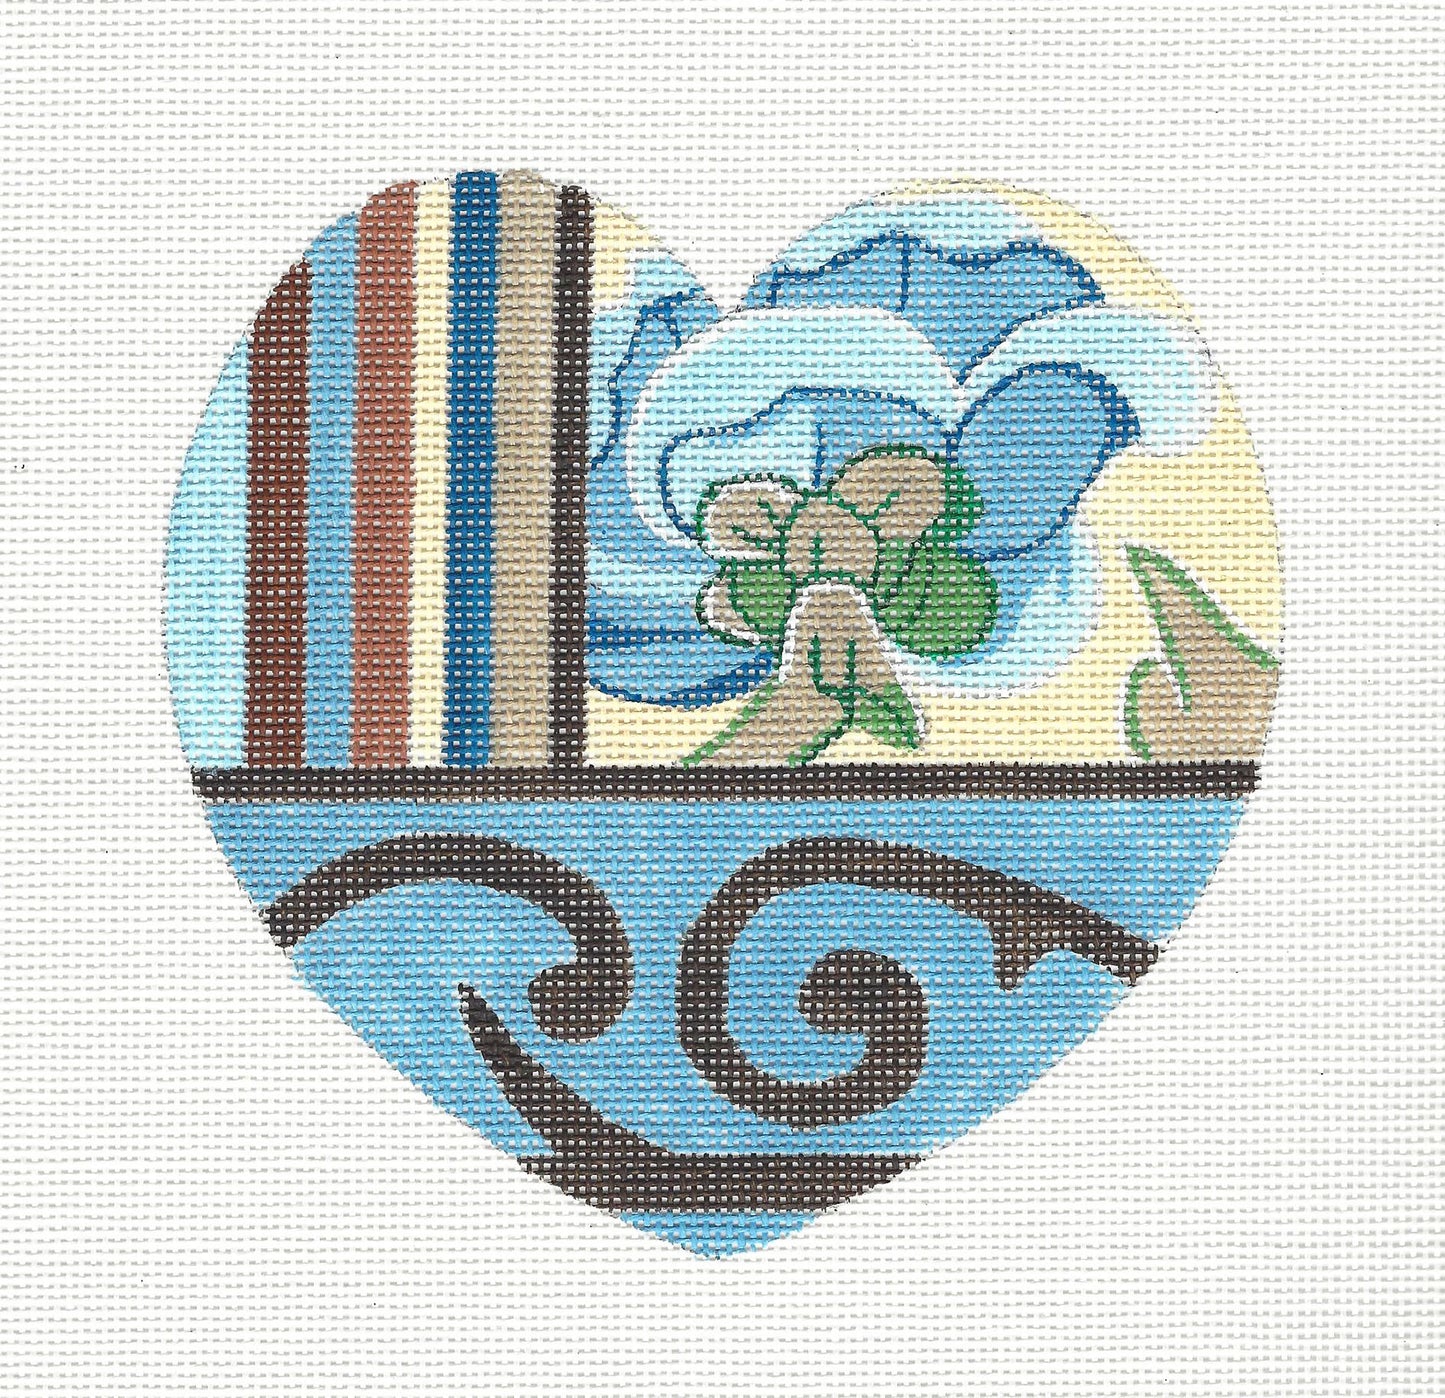 Heart ~ Blue Floral Heart Ornament handpainted Needlepoint Canvas by Raymond Crawford